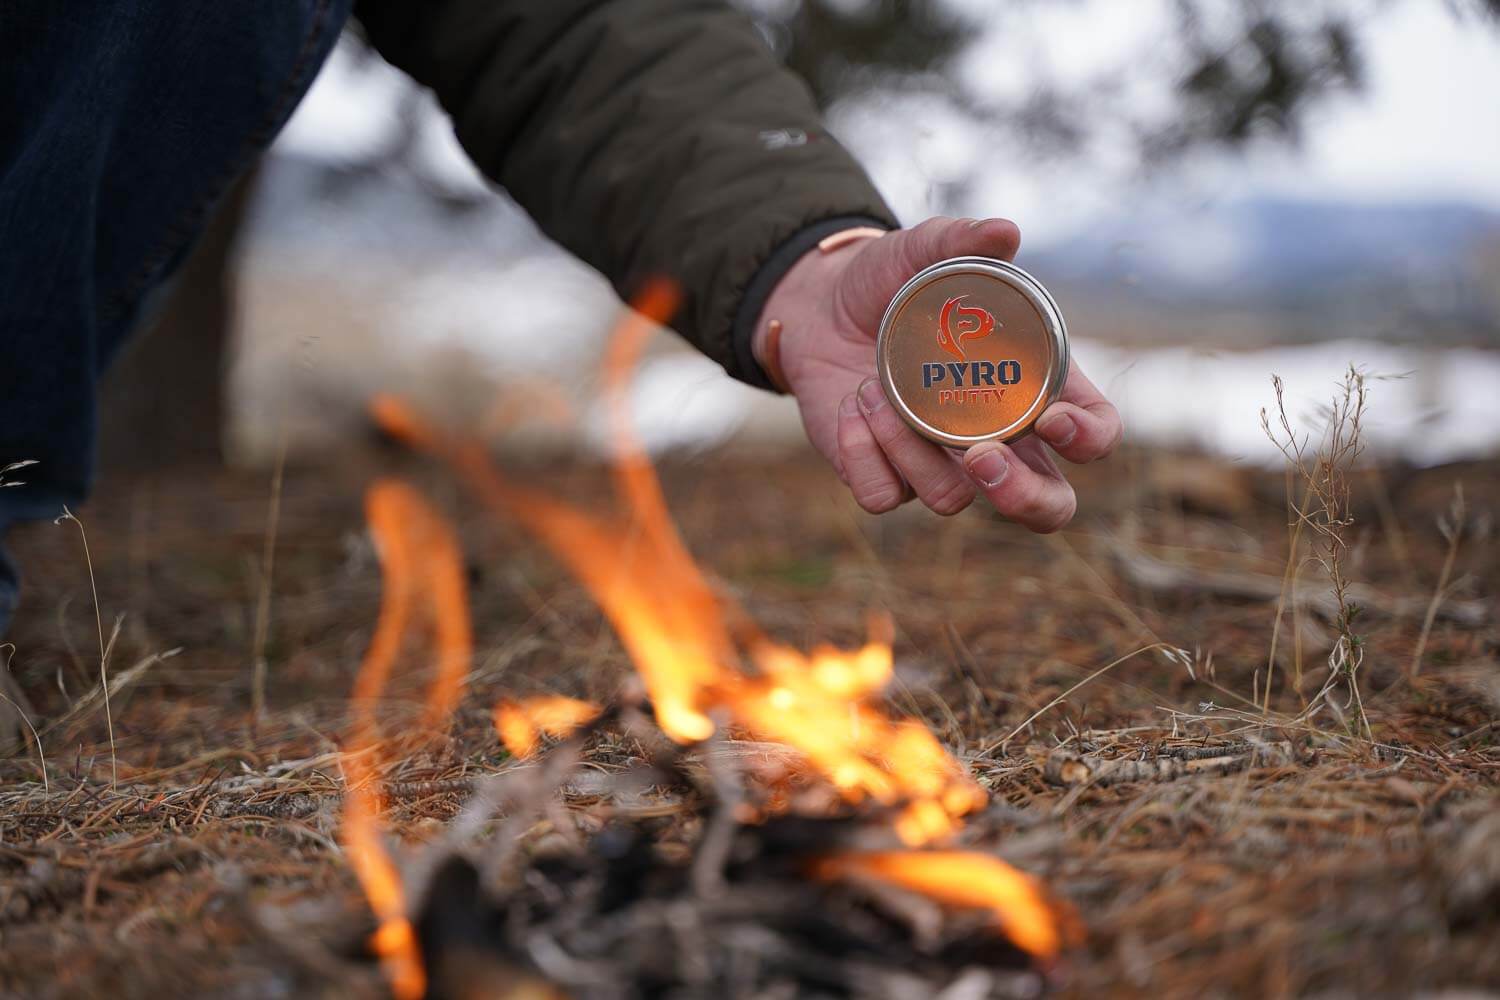 A can of PyroPutty in front of a burning fire